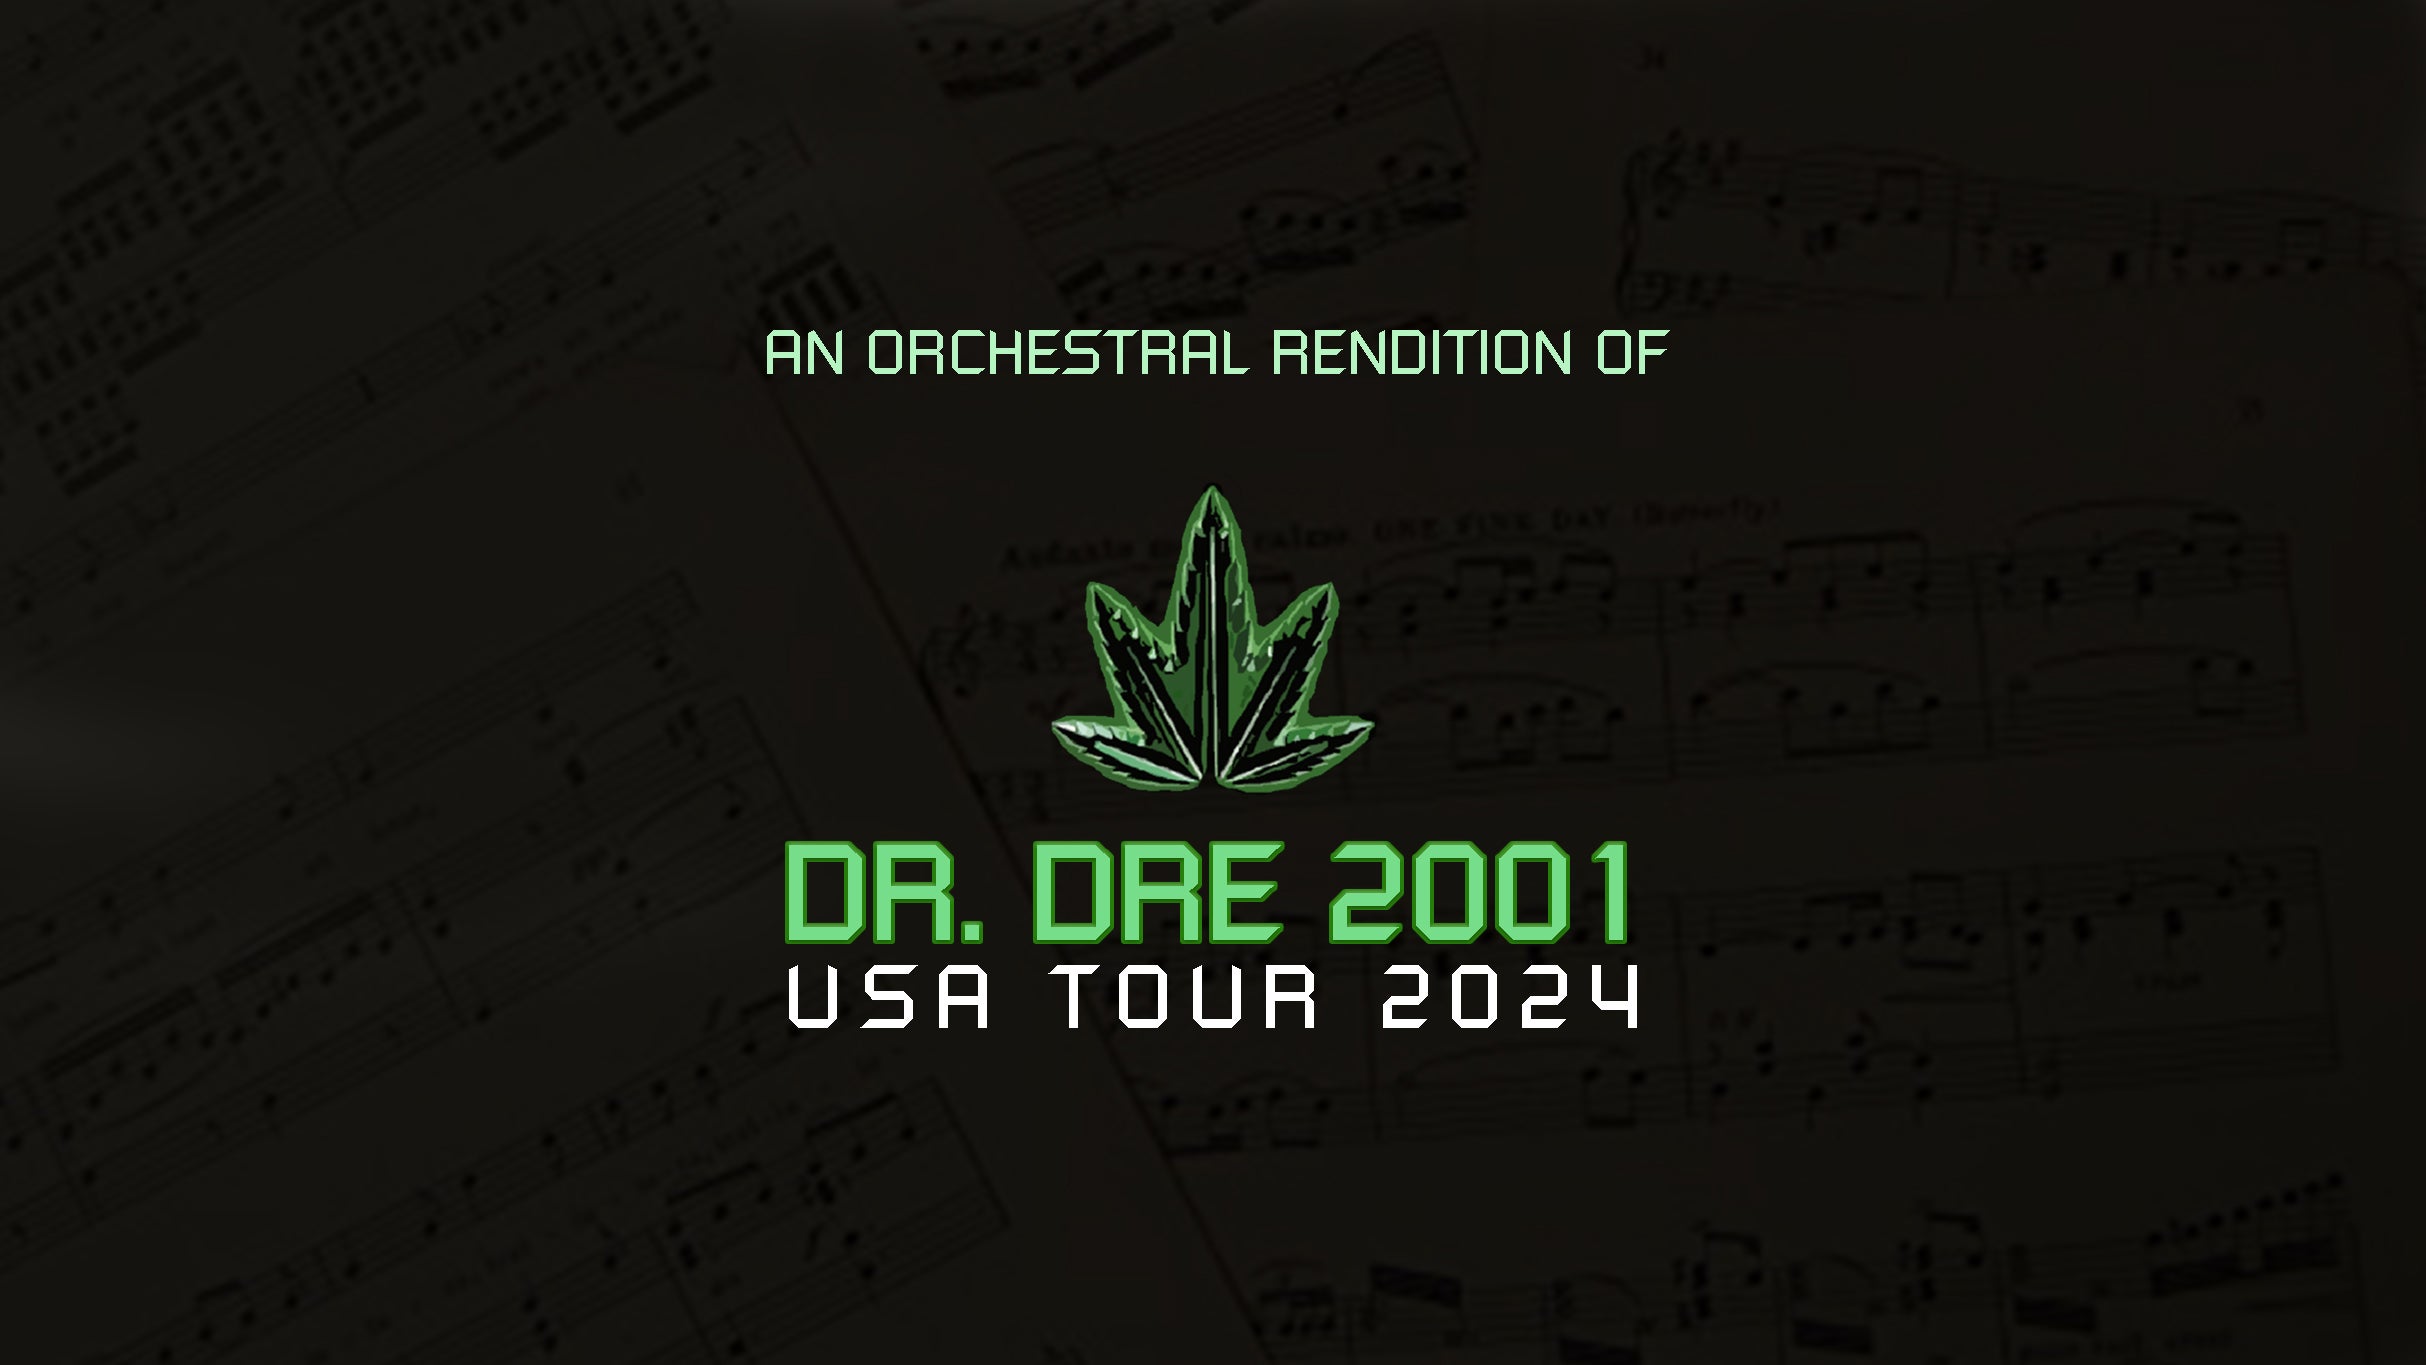 An Orchestral Rendition of Dr. Dre 2001